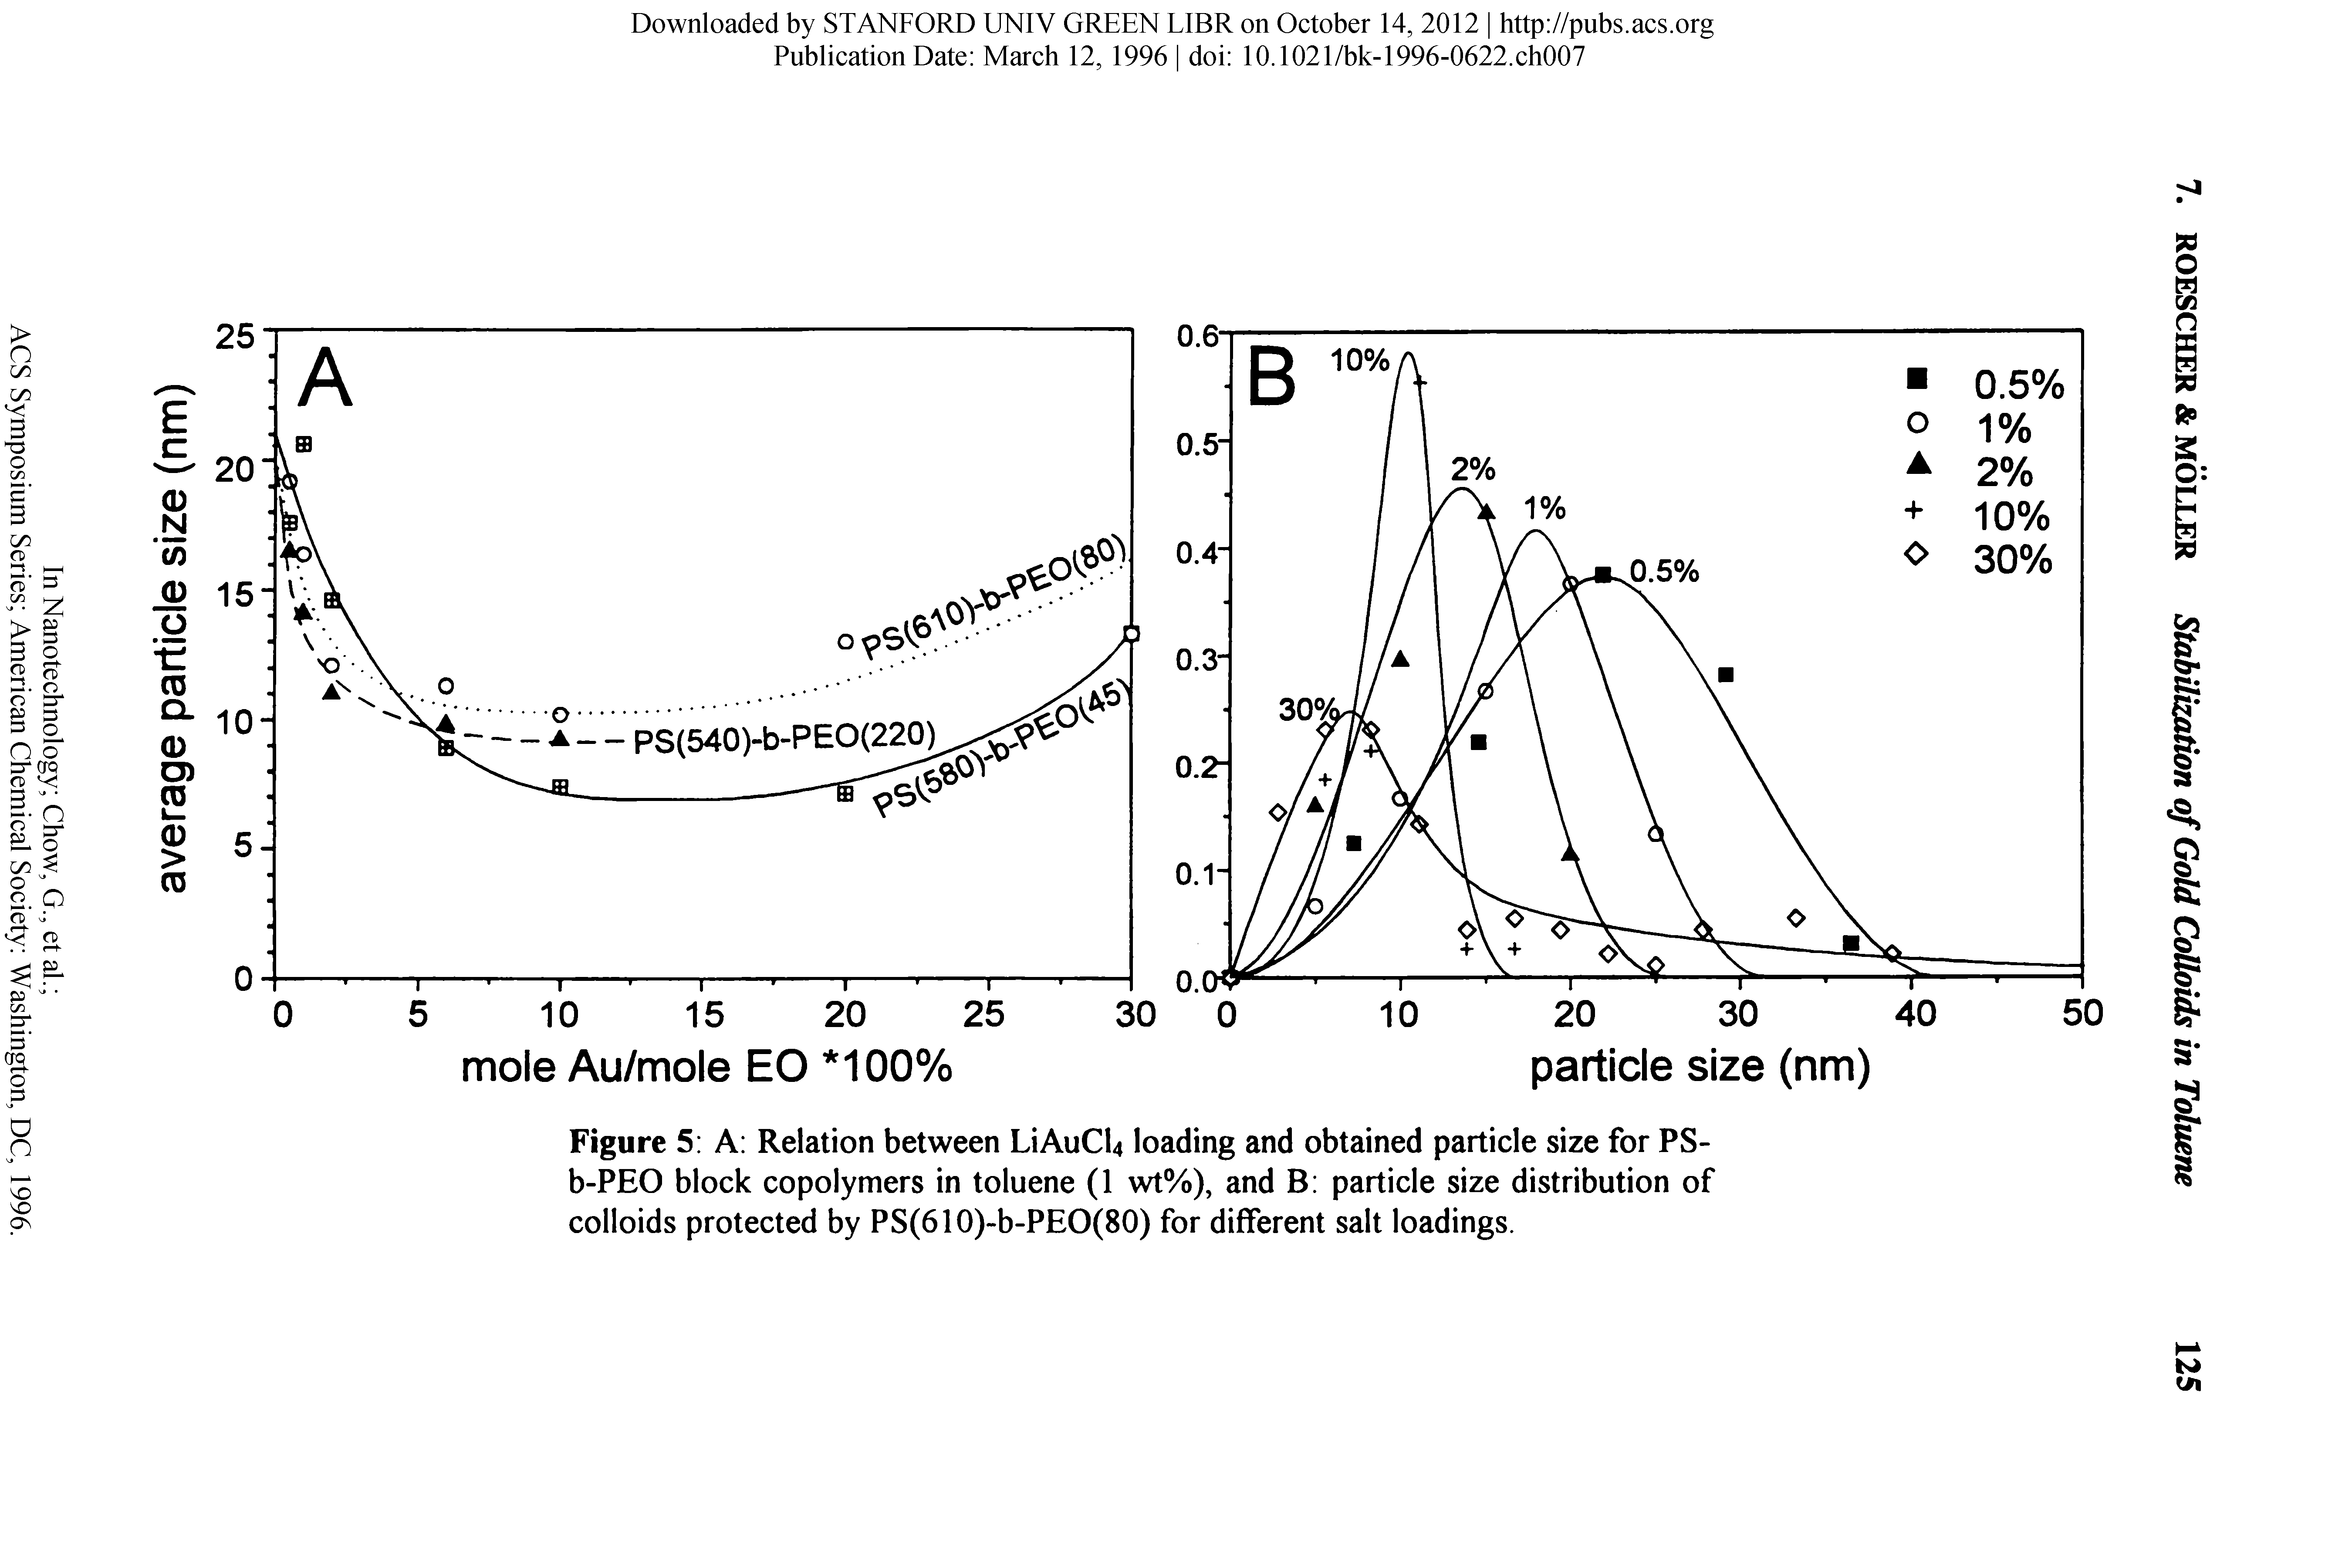 Figure 5 A Relation between LiAuCU loading and obtained particle size for PS-b-PEO block copolymers in toluene (1 wt%), and B particle size distribution of colloids protected by PS(610)-b-PEO(80) for different salt loadings.